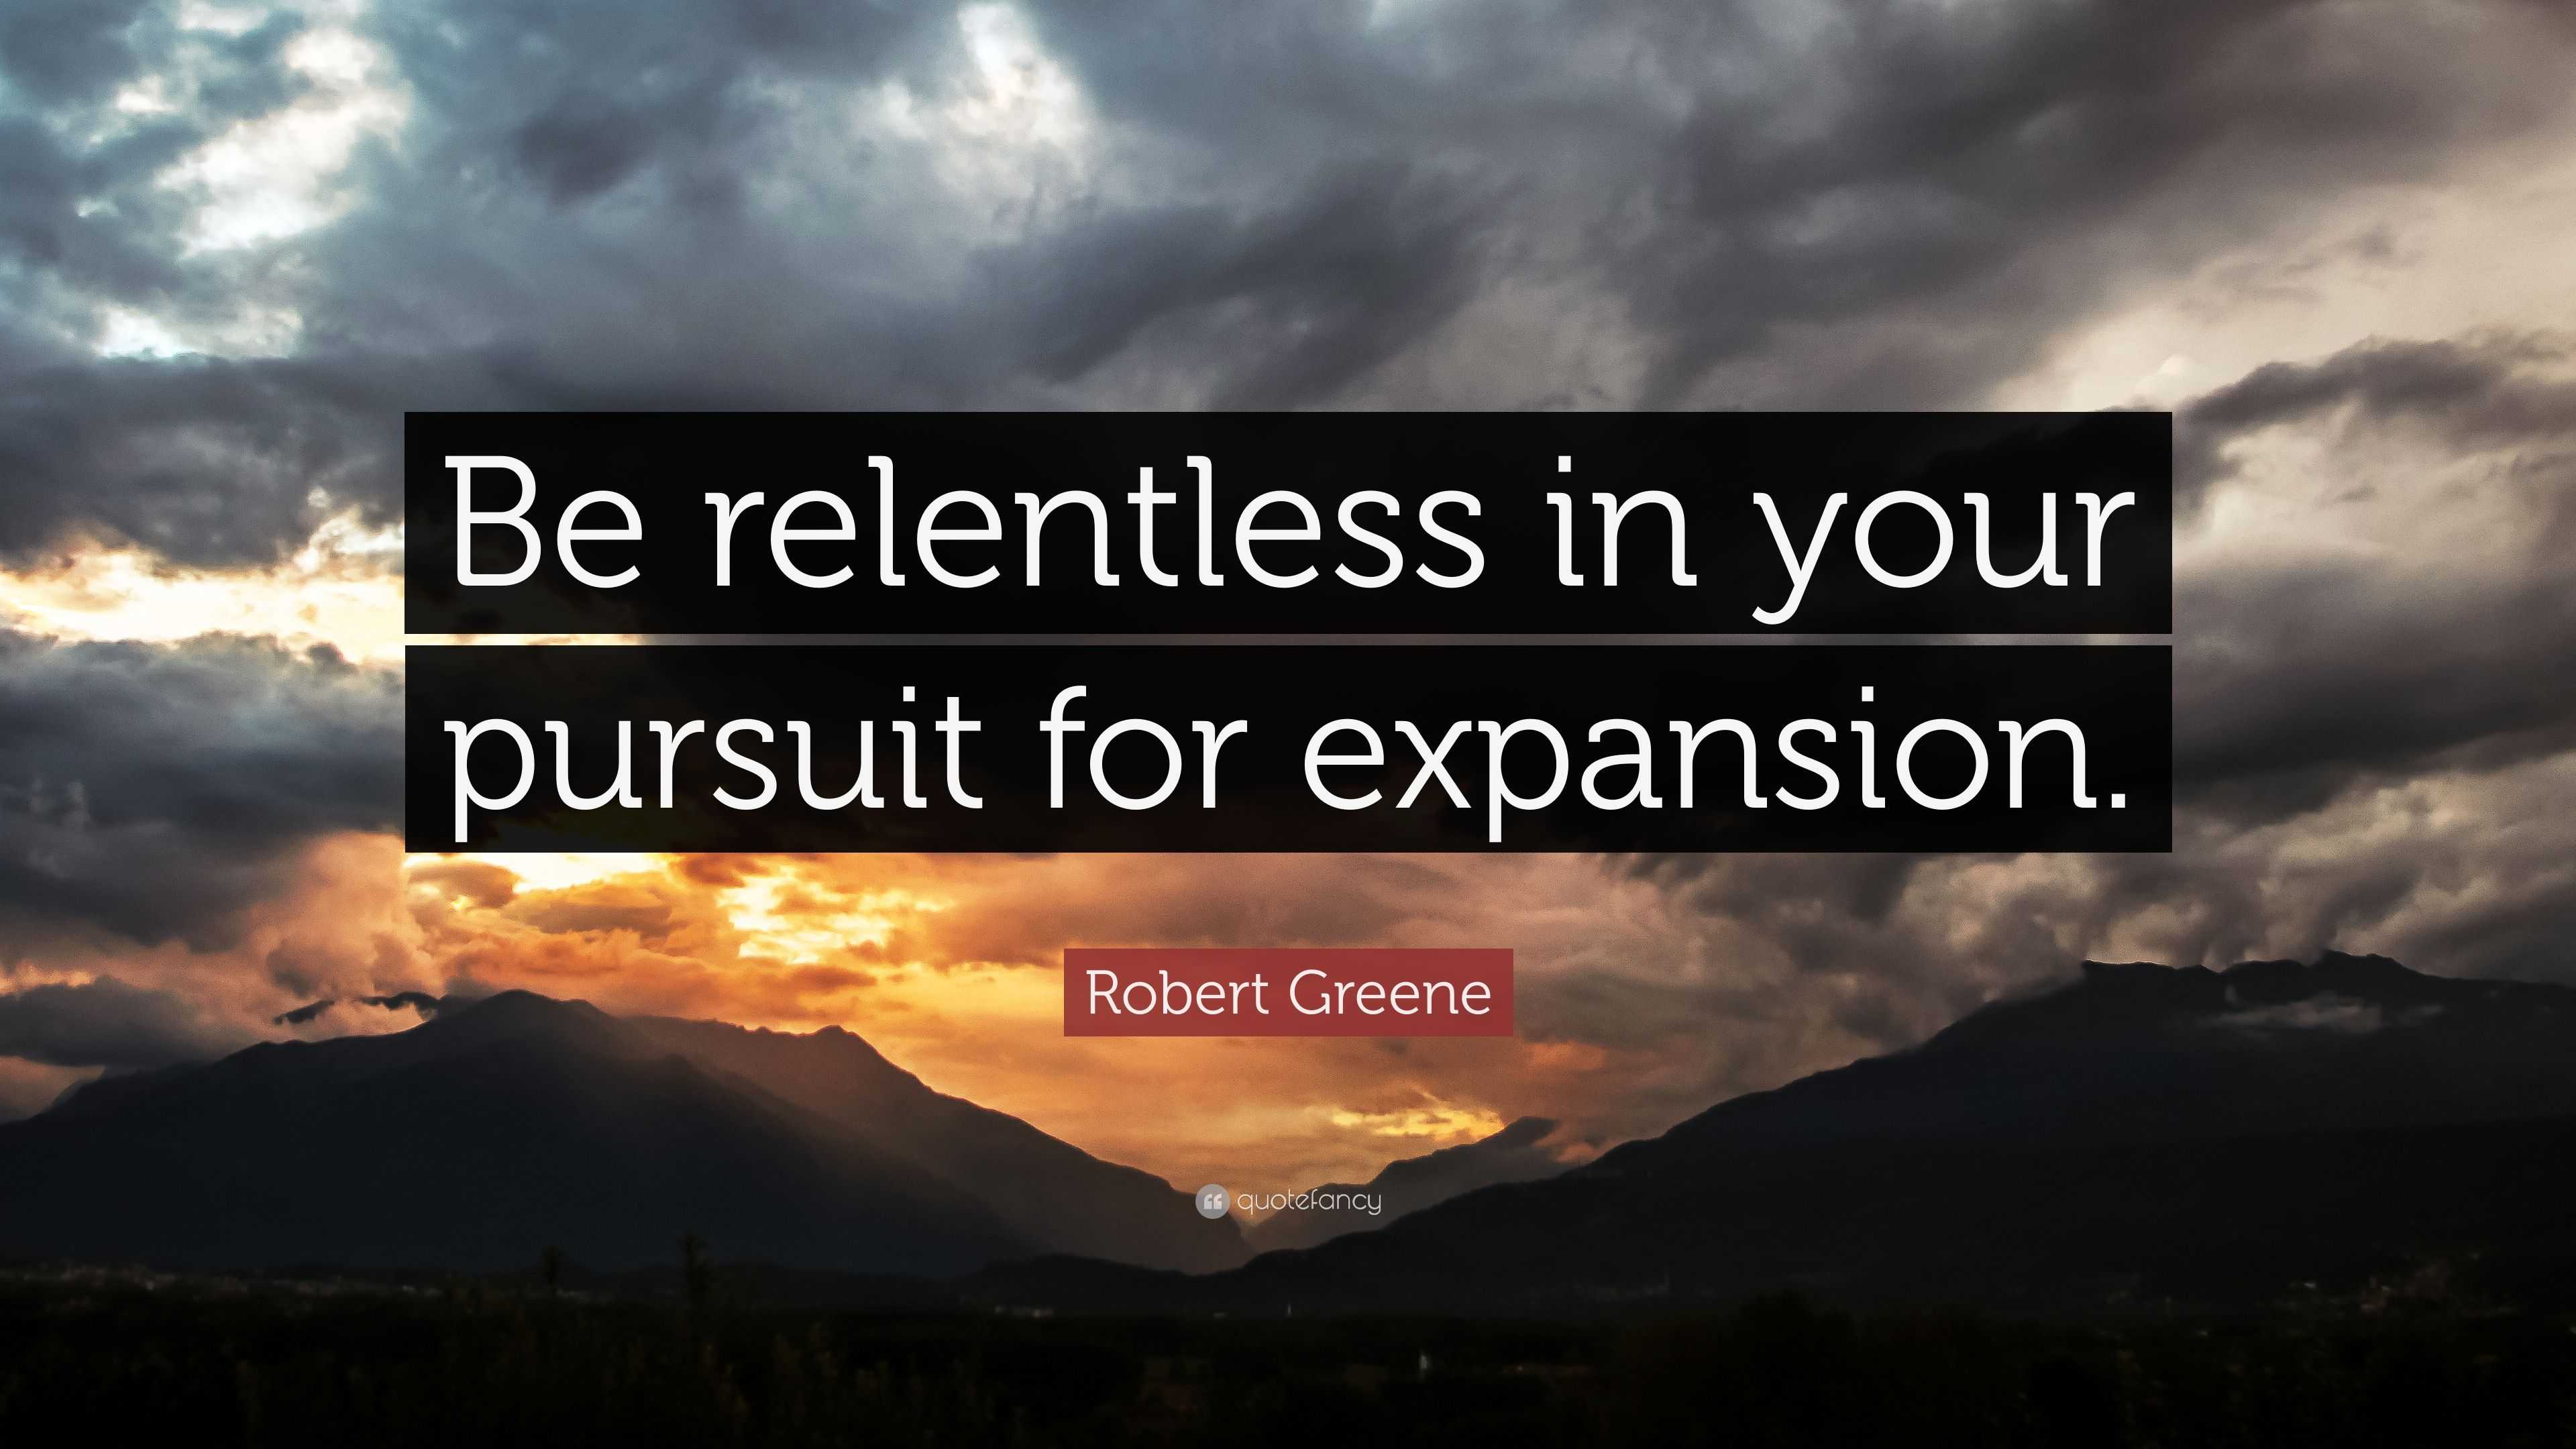 Robert Greene Quote: “Be relentless in your pursuit for expansion.”